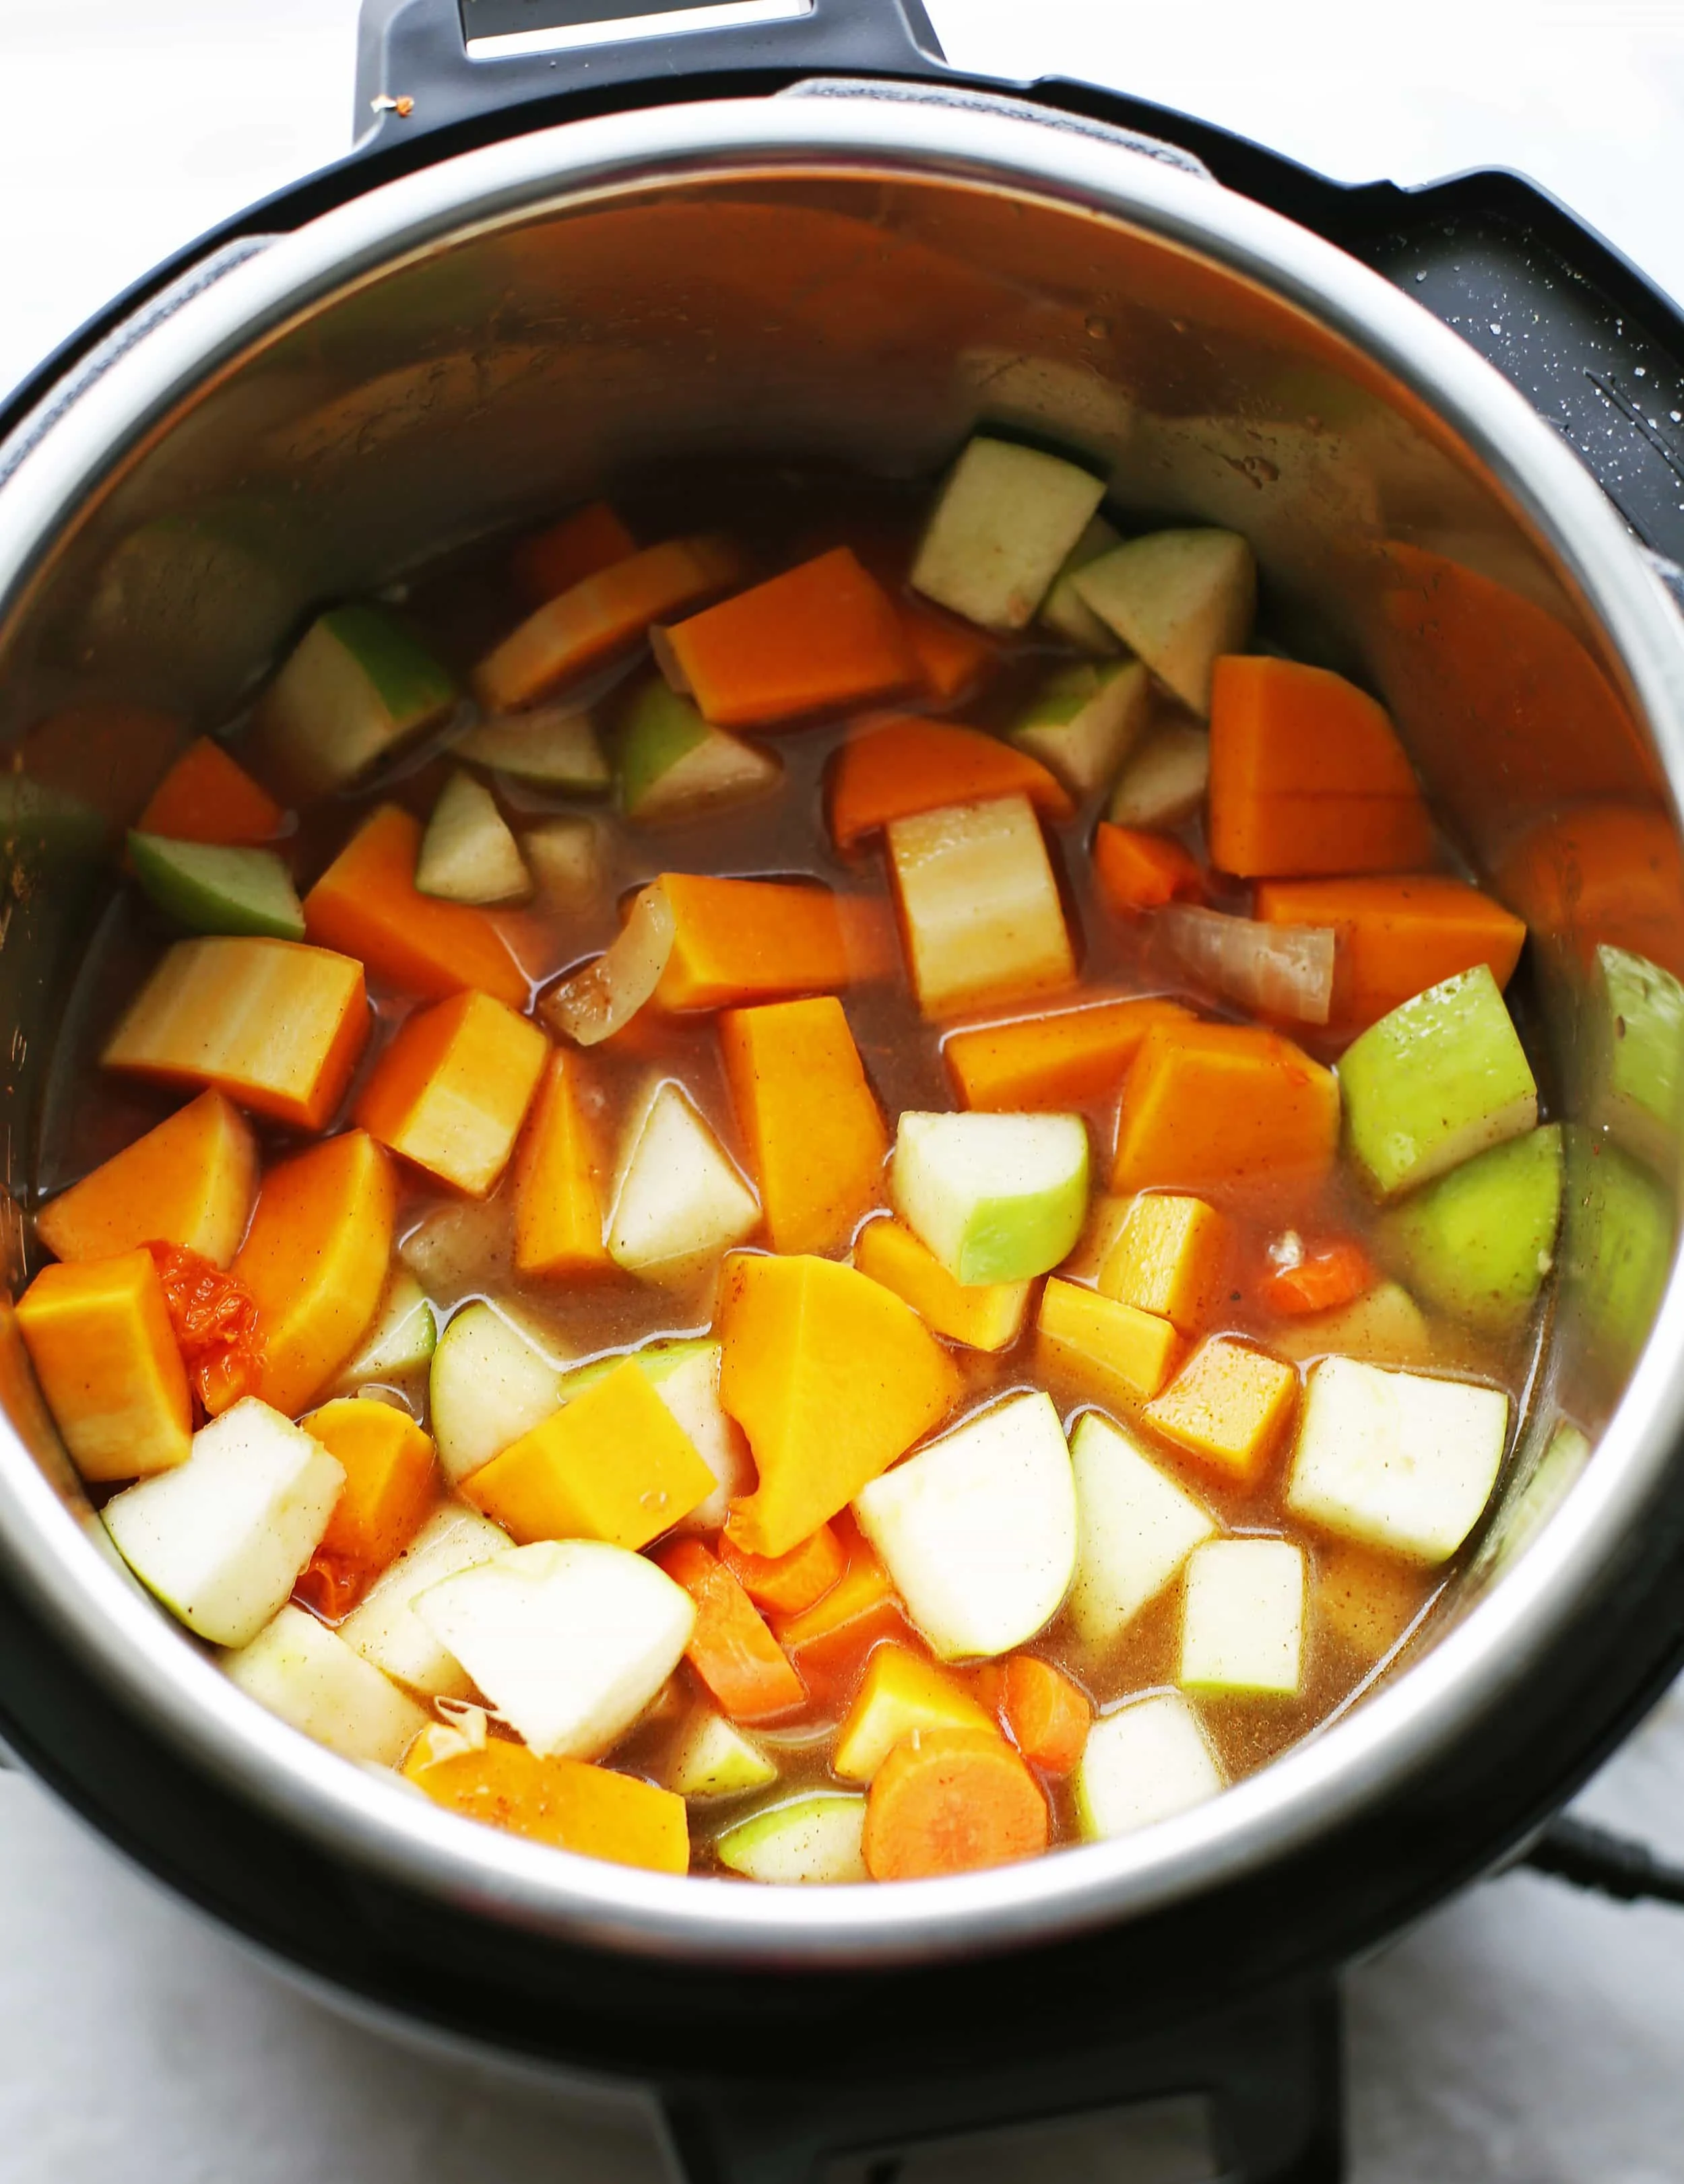 Sautéed onions, ginger, and garlic with chopped butternut squash, granny smith apples, carrots, spices, and vegetable broth are mixed in the Instant Pot.